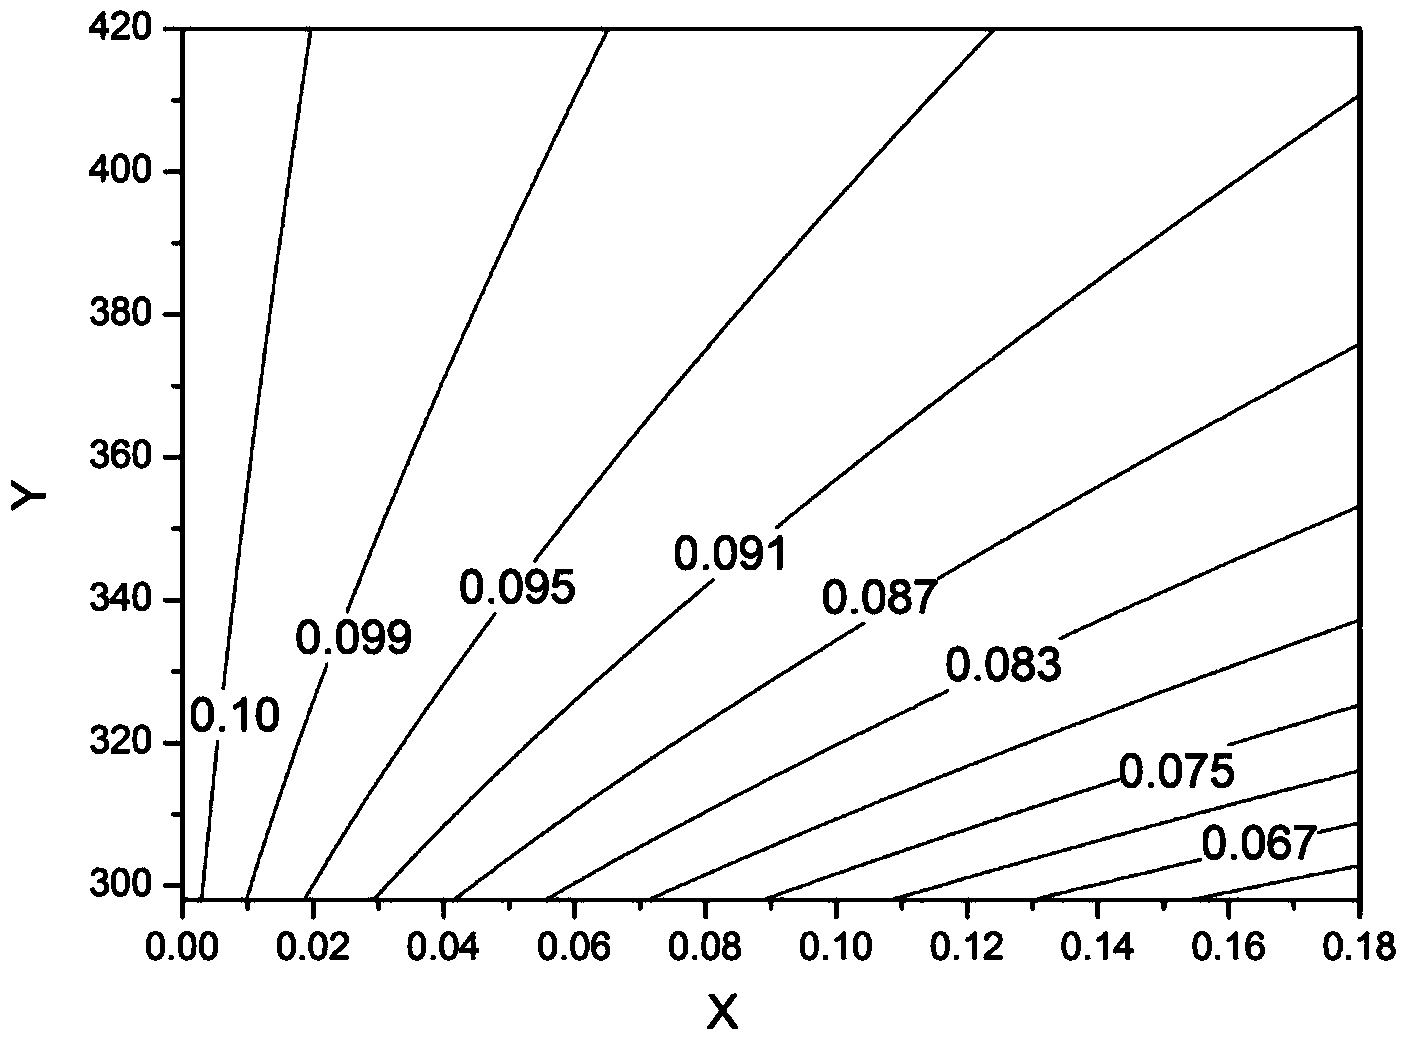 Method for forecasting retained austenite change of Q&P steel after transformation under different temperatures